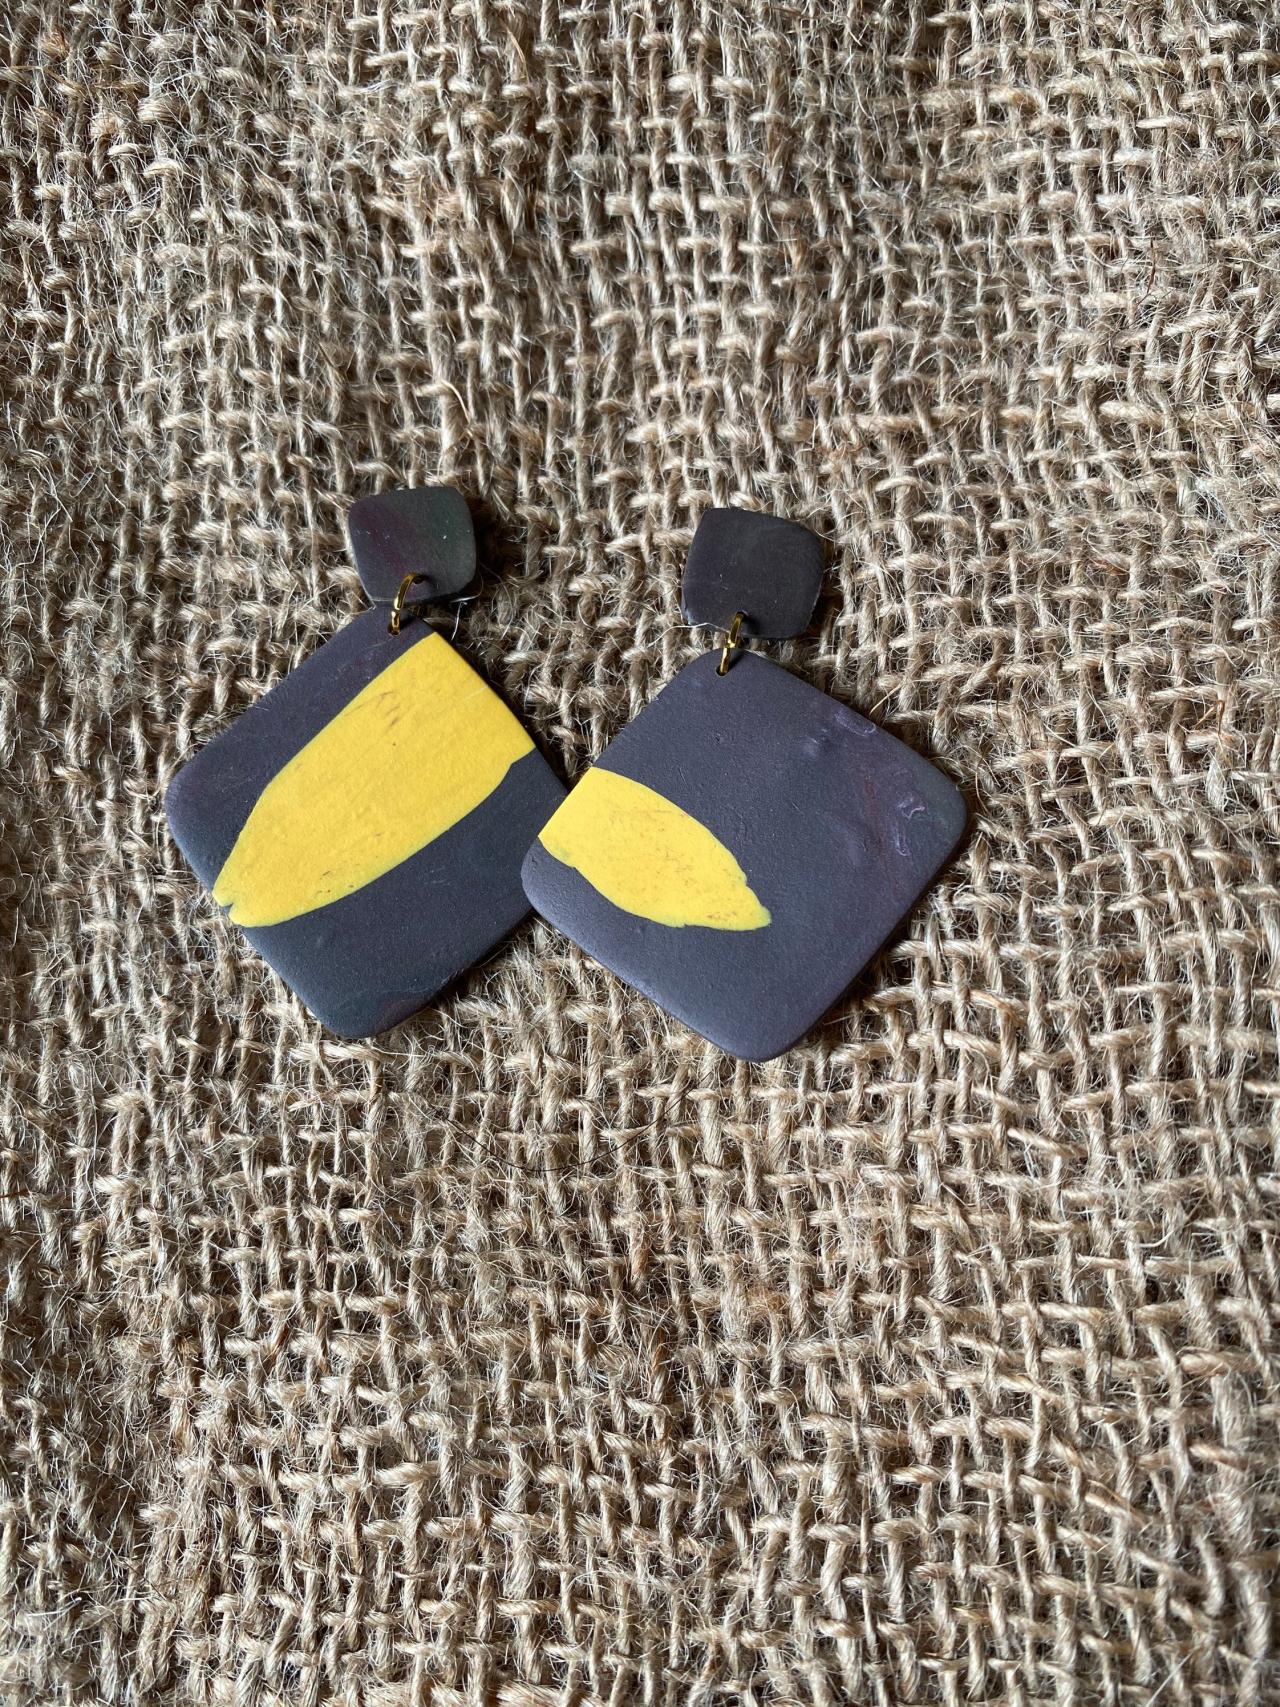 Ava | Bae’s Creations | Polymer Clay Drop Earrings | Simple Unique Handmade Polymer Clay Earrings | Black Owned